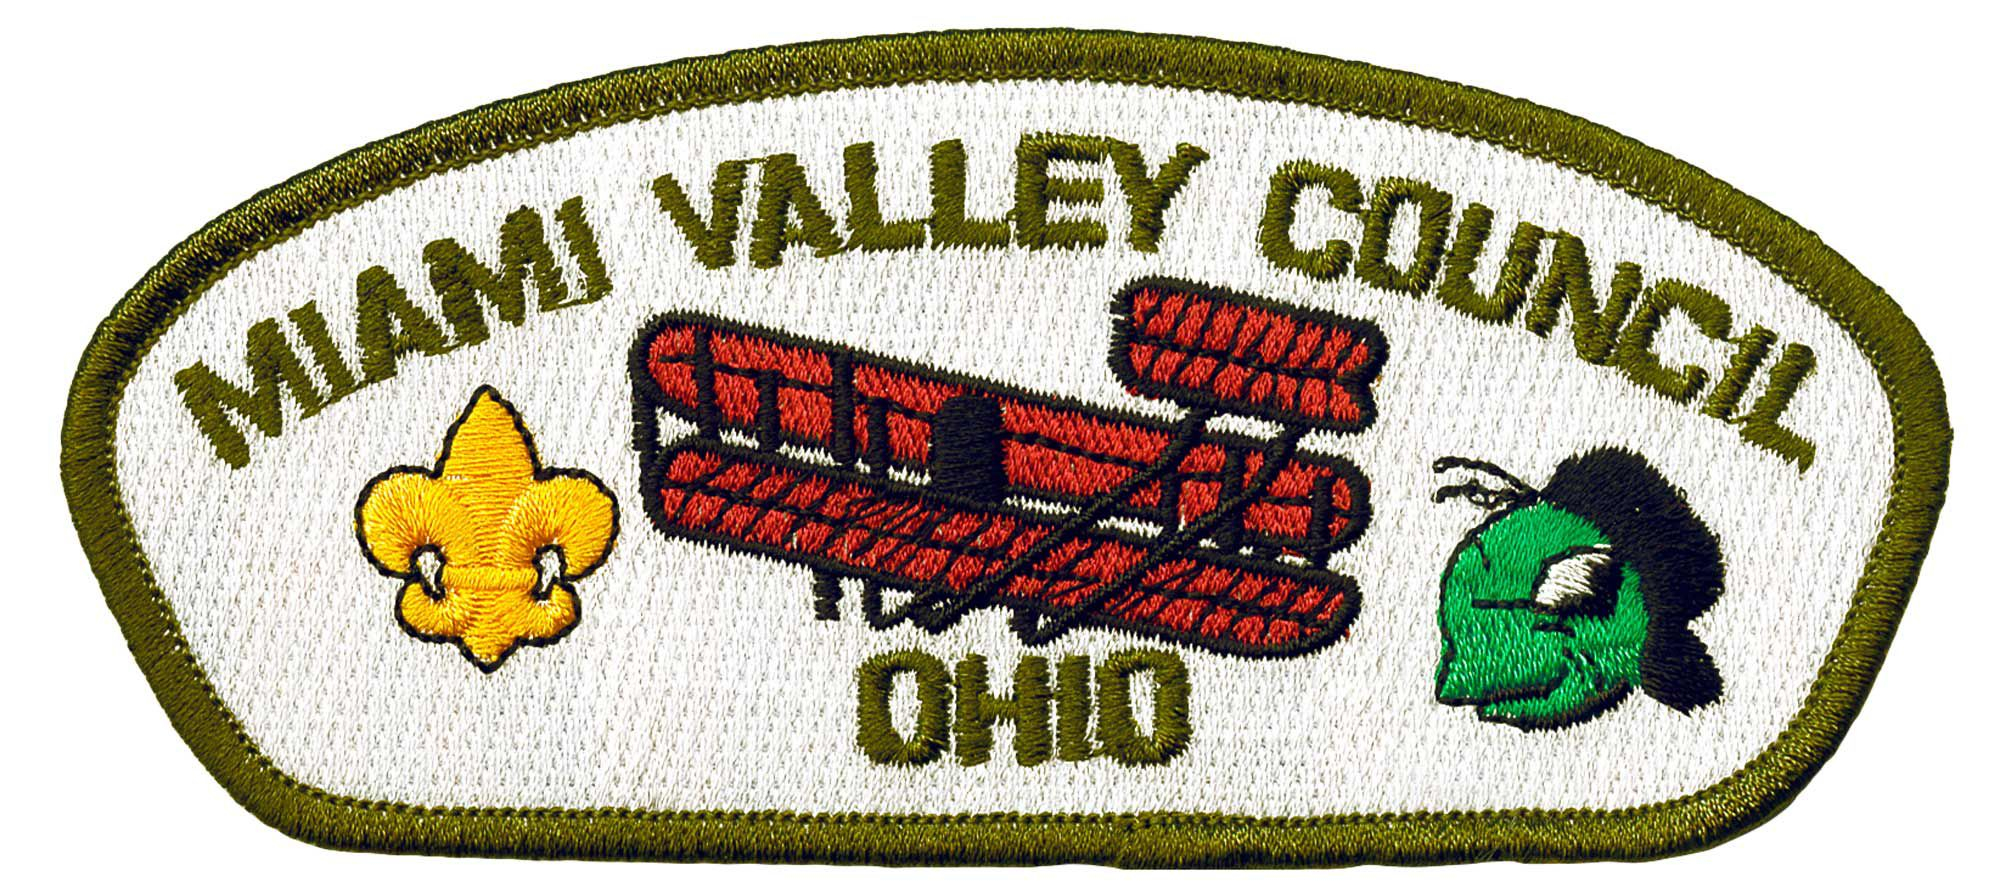 Wright Brothers District Fall Camporee Patch BSA Boy Scouts Miami Valley Council 